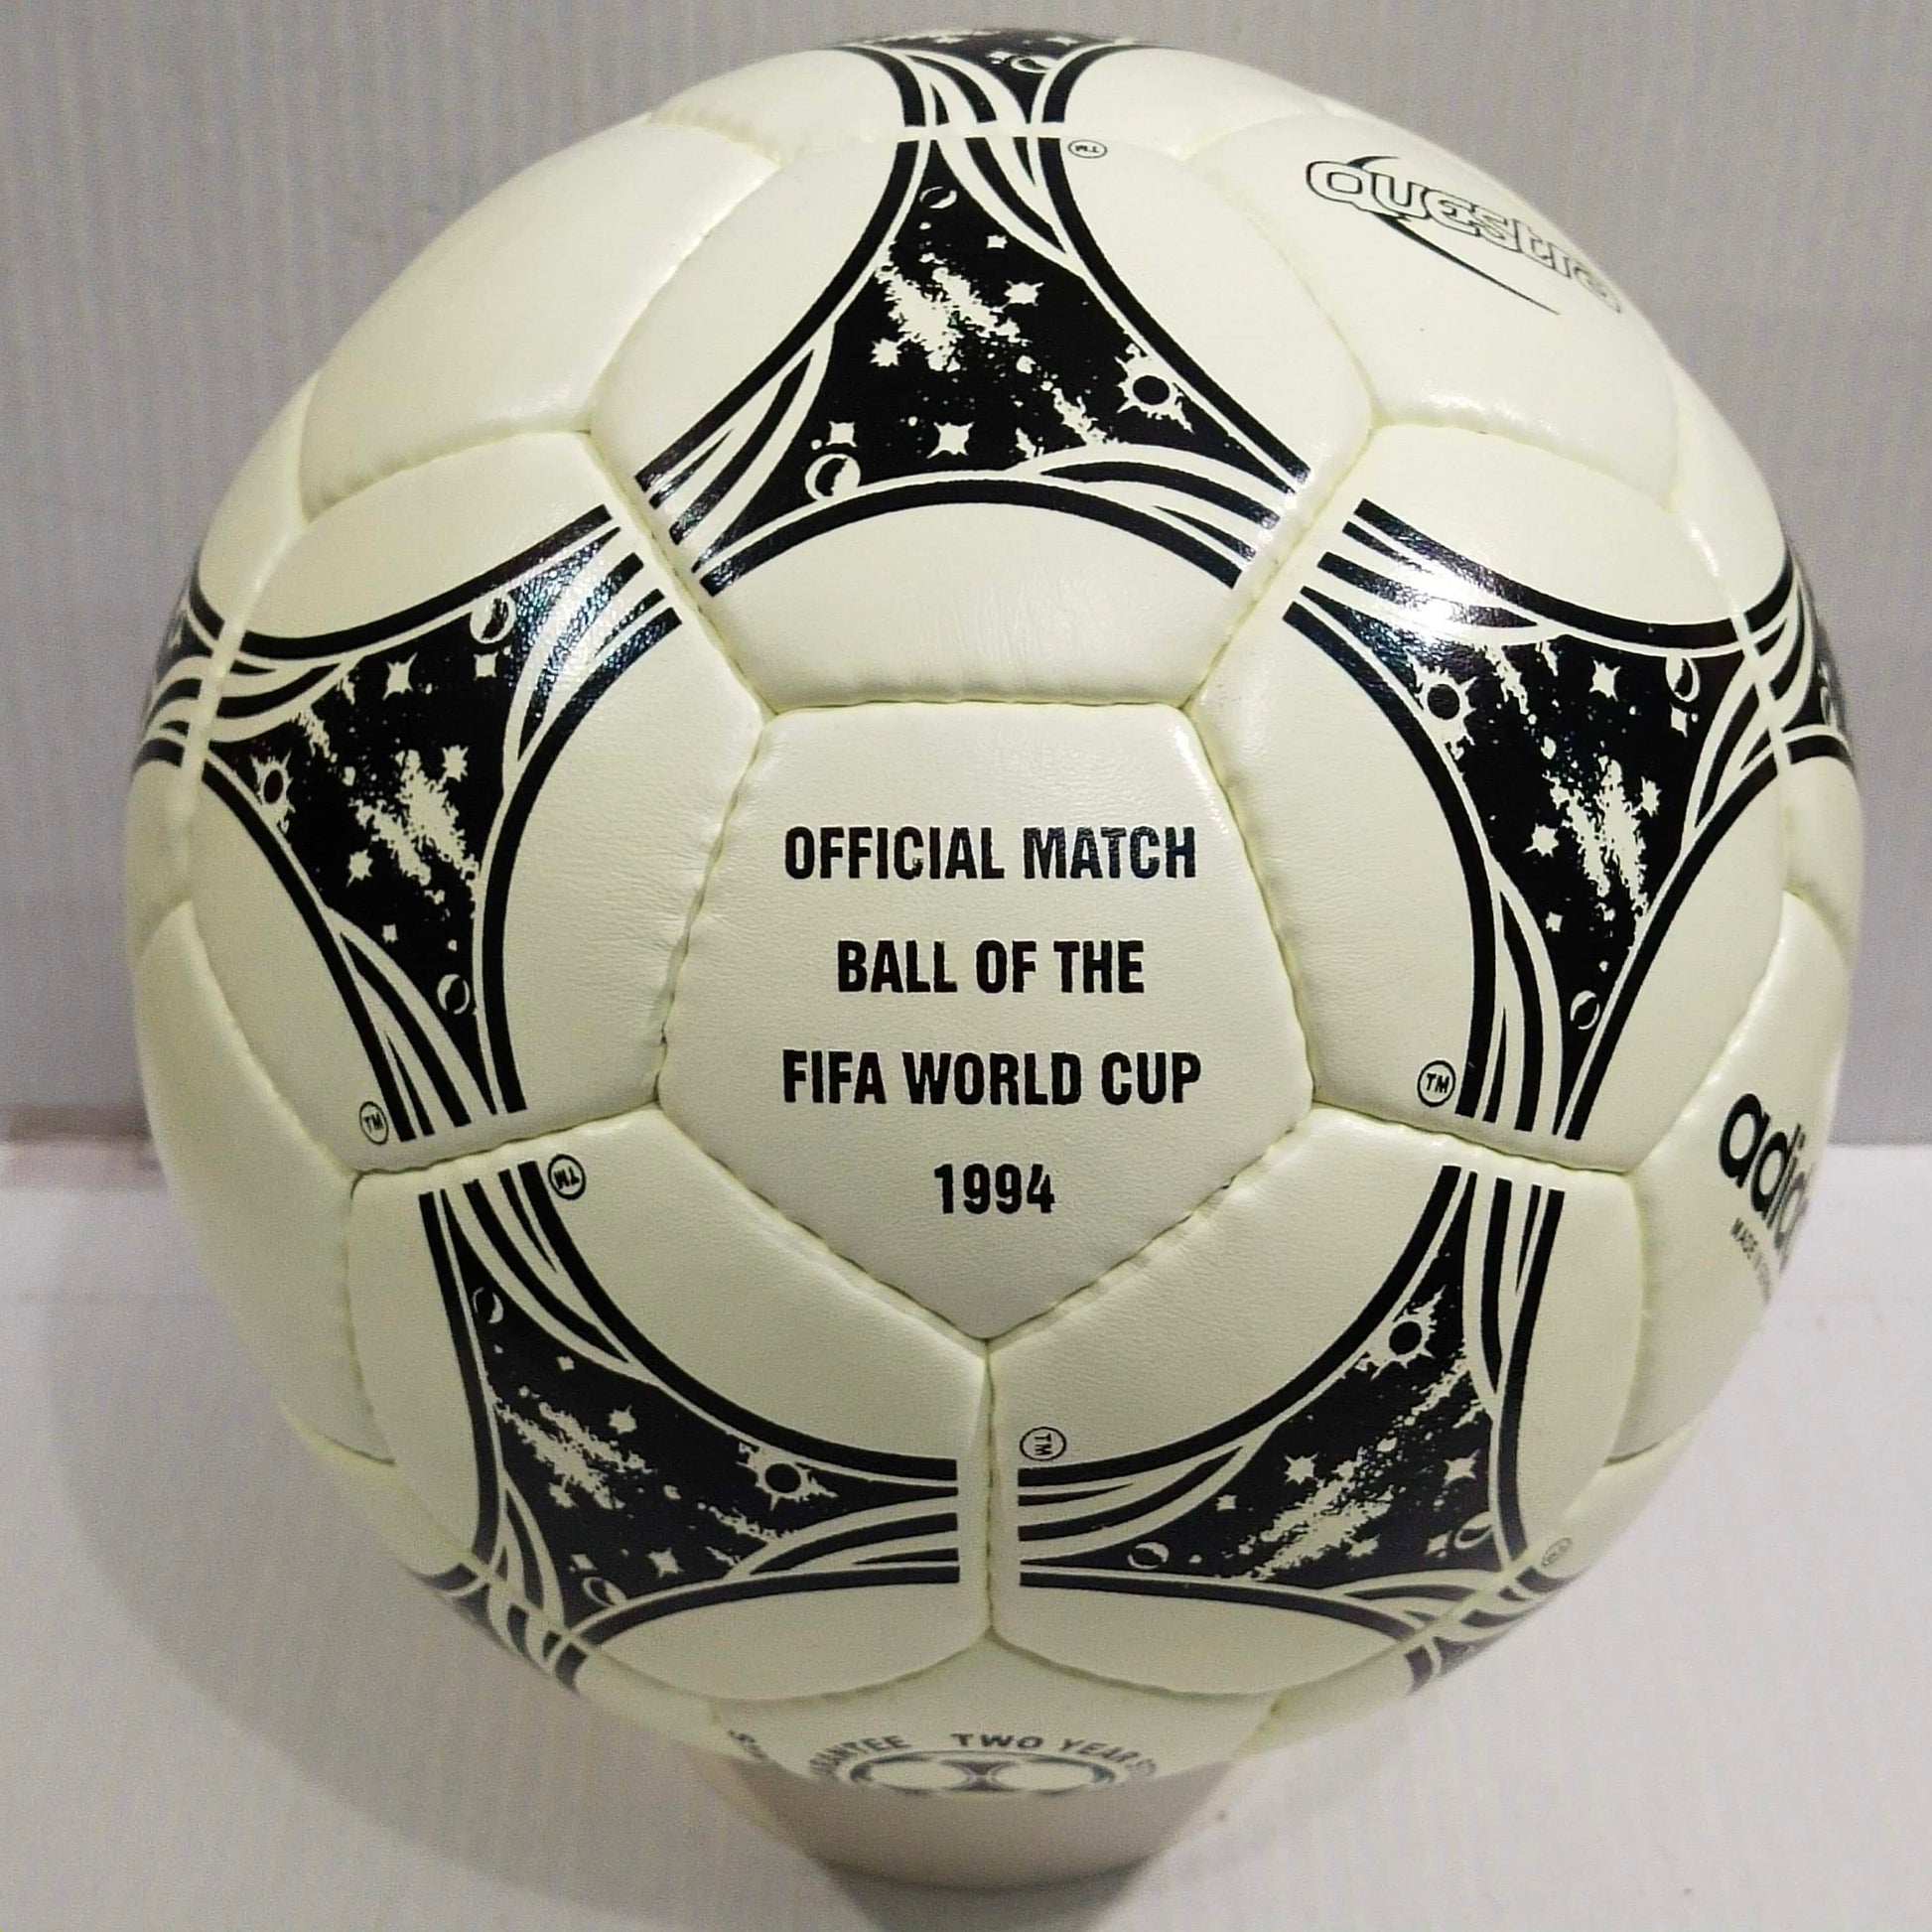 Adidas Questra | 1994 FIFA World Cup Ball | Genuine Leather Off White | SIZE 5 02